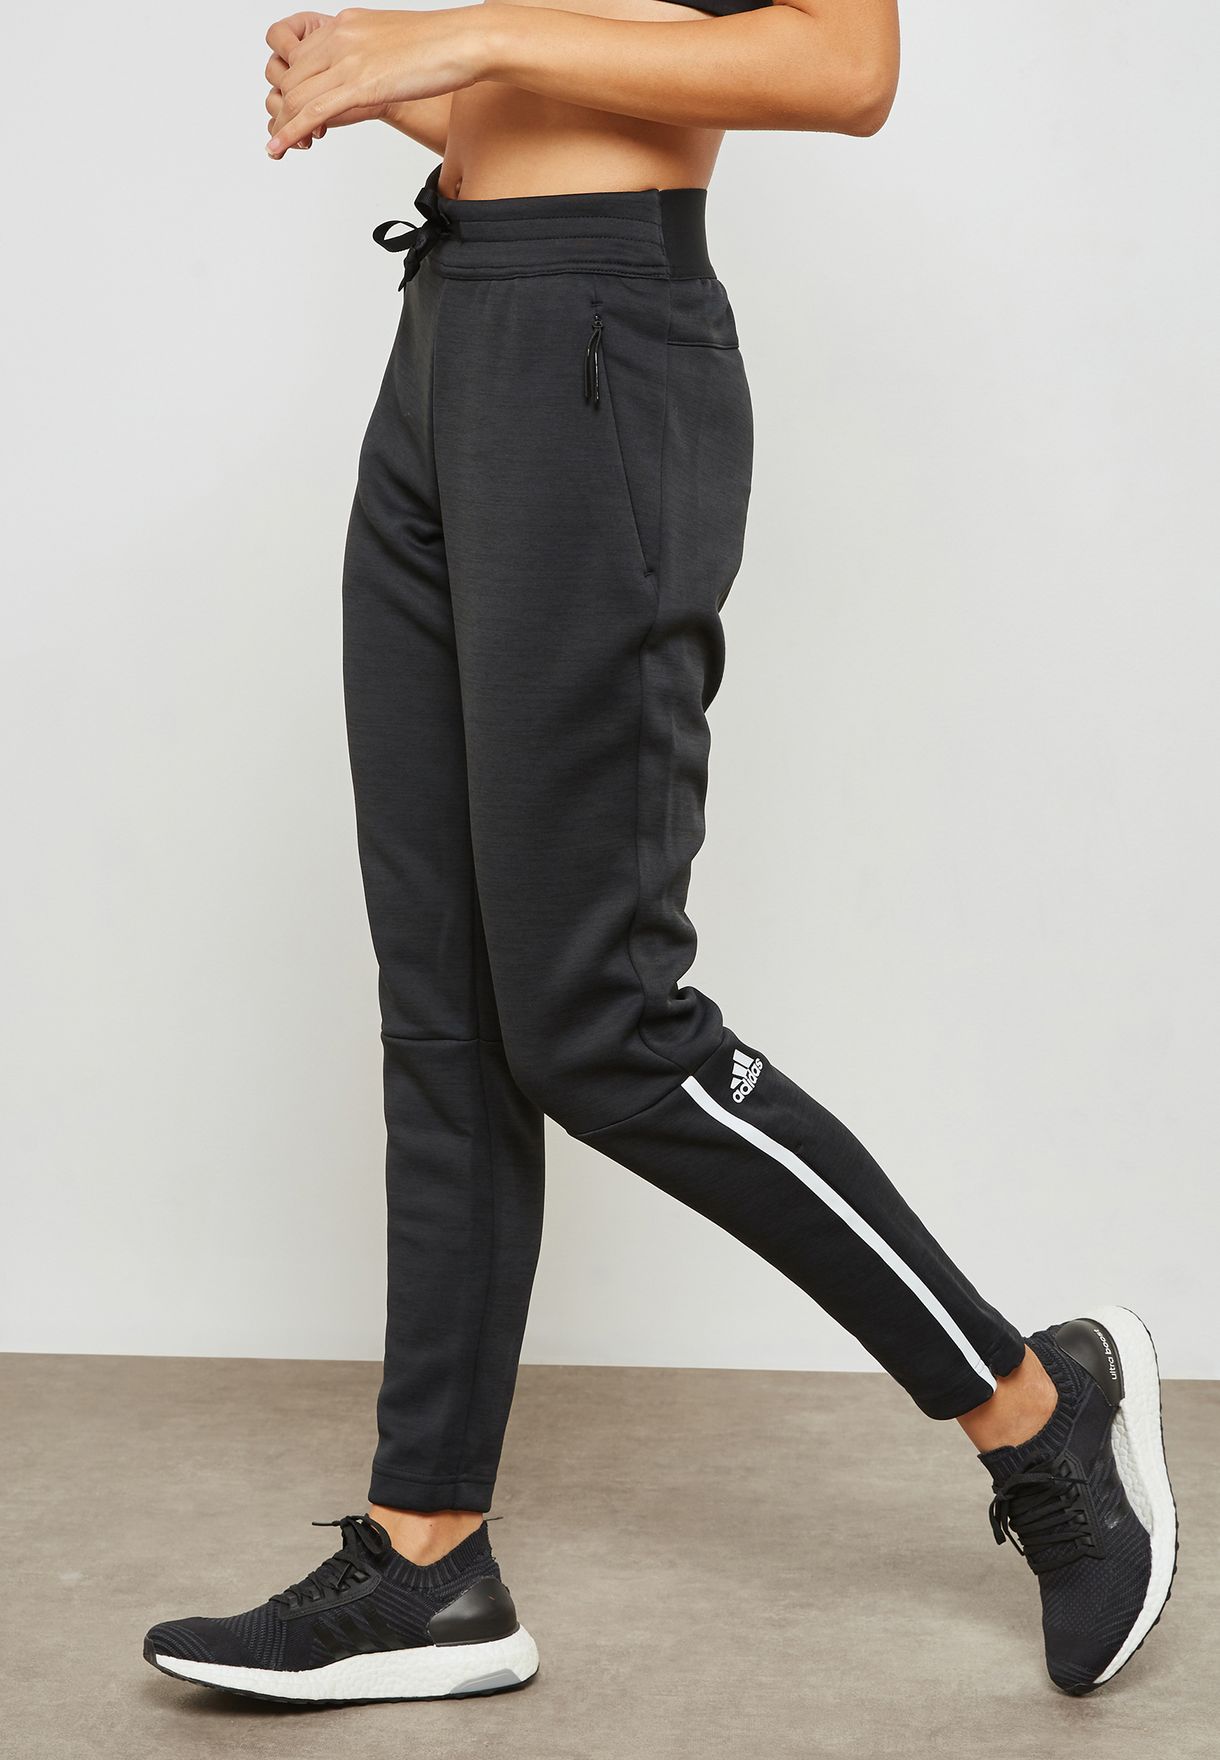 Buy adidas black Z.N.E Sweatpants for Women in Muscat, other cities | CW5746